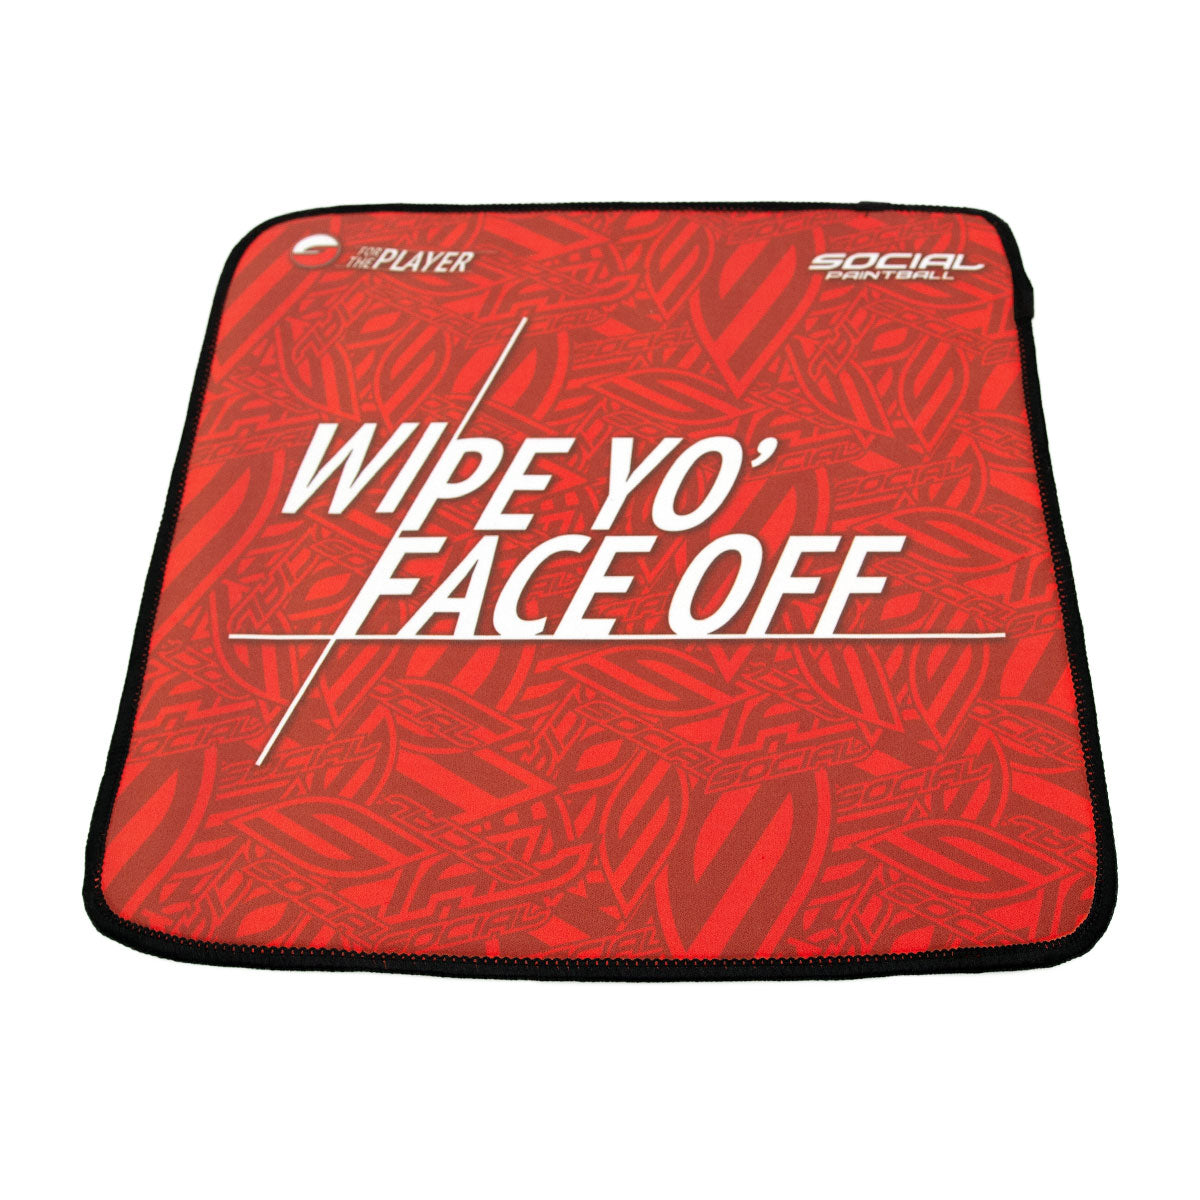 Microfiber Cleaning Cloth, Wipe Yo Face Off | Paintball Cleaning Microfiber | Social Paintball